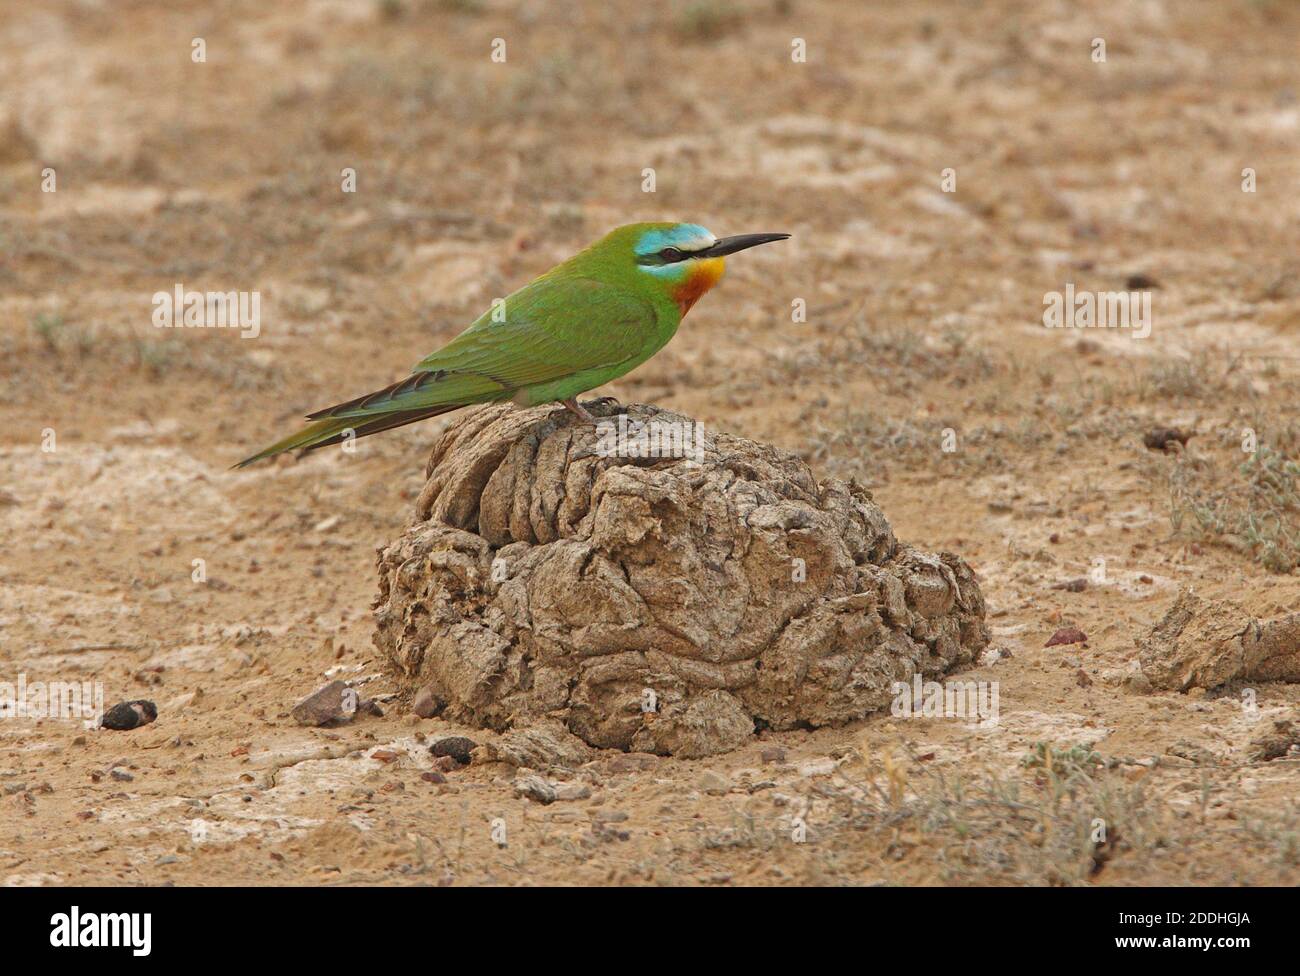 Blue-cheeked Bee-eater (Merops persicus persicus) adult perched on cow dung  Lake Balkhash, Kazakhstan           June Stock Photo